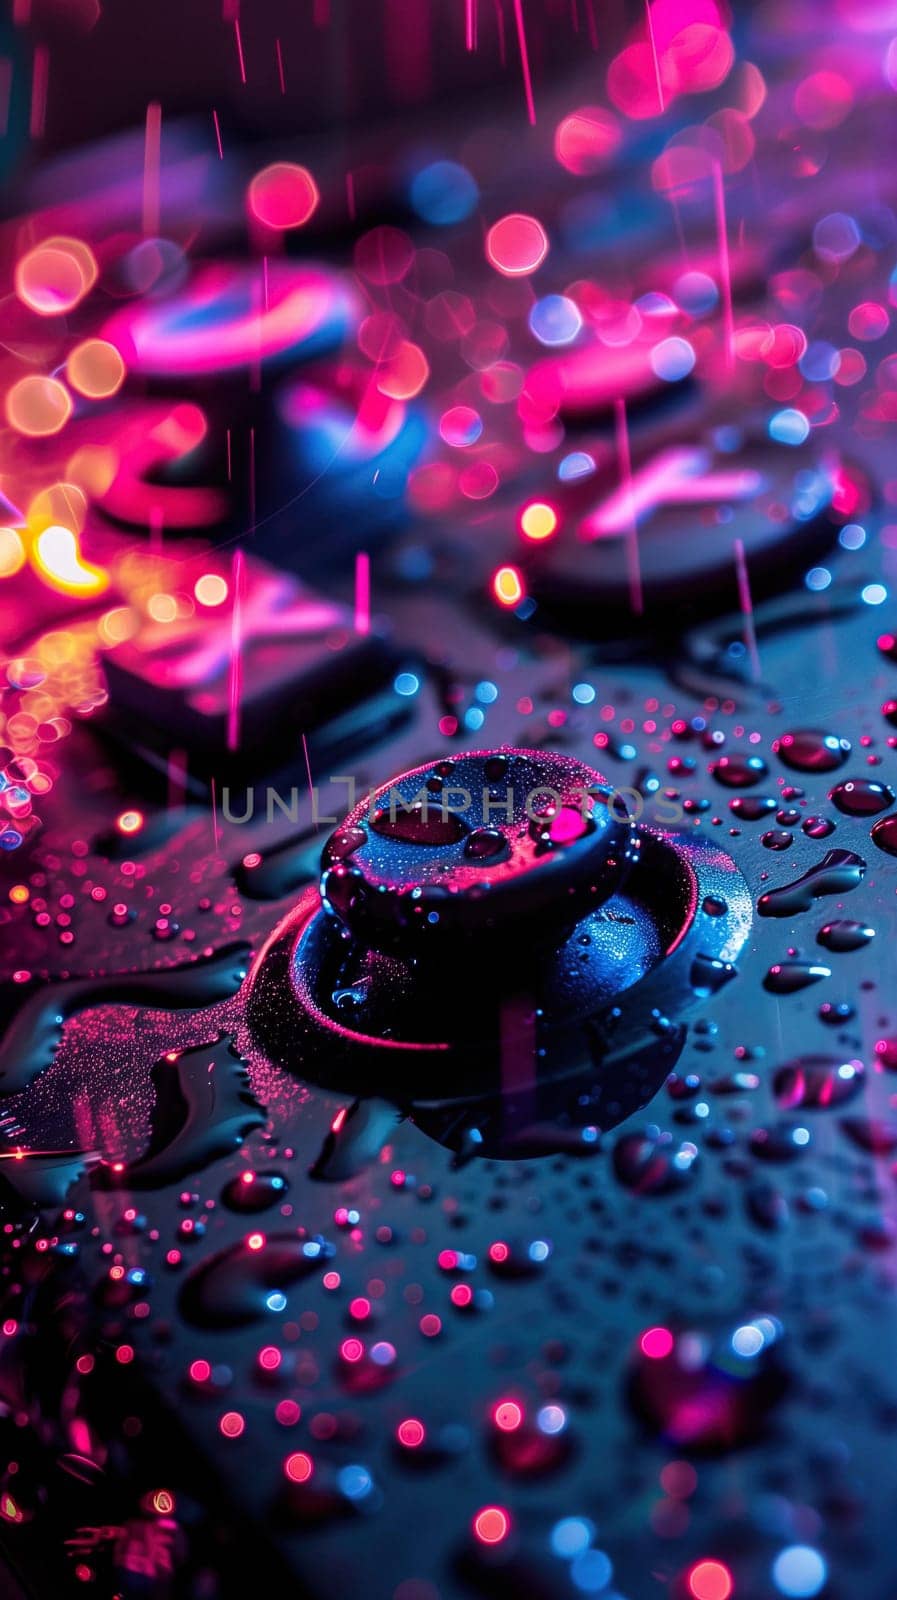 Buttons of joystick with water droplets in neon lights by Dustick